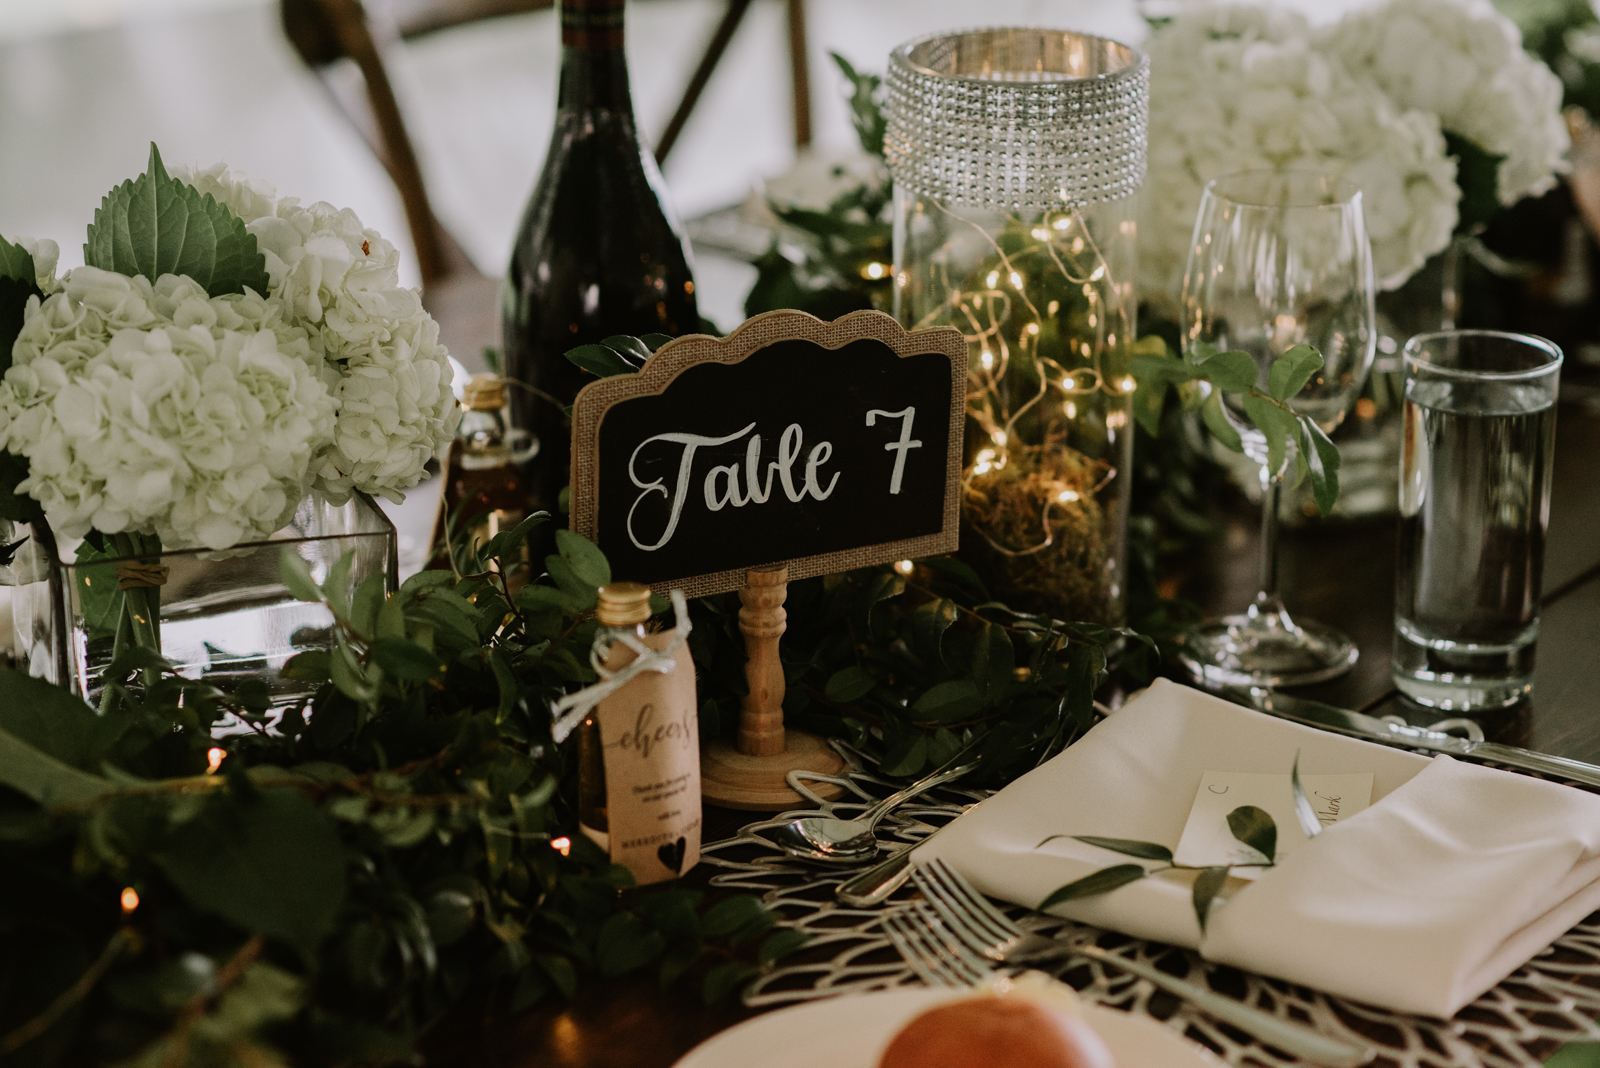 table scape of outdoor wedding reception